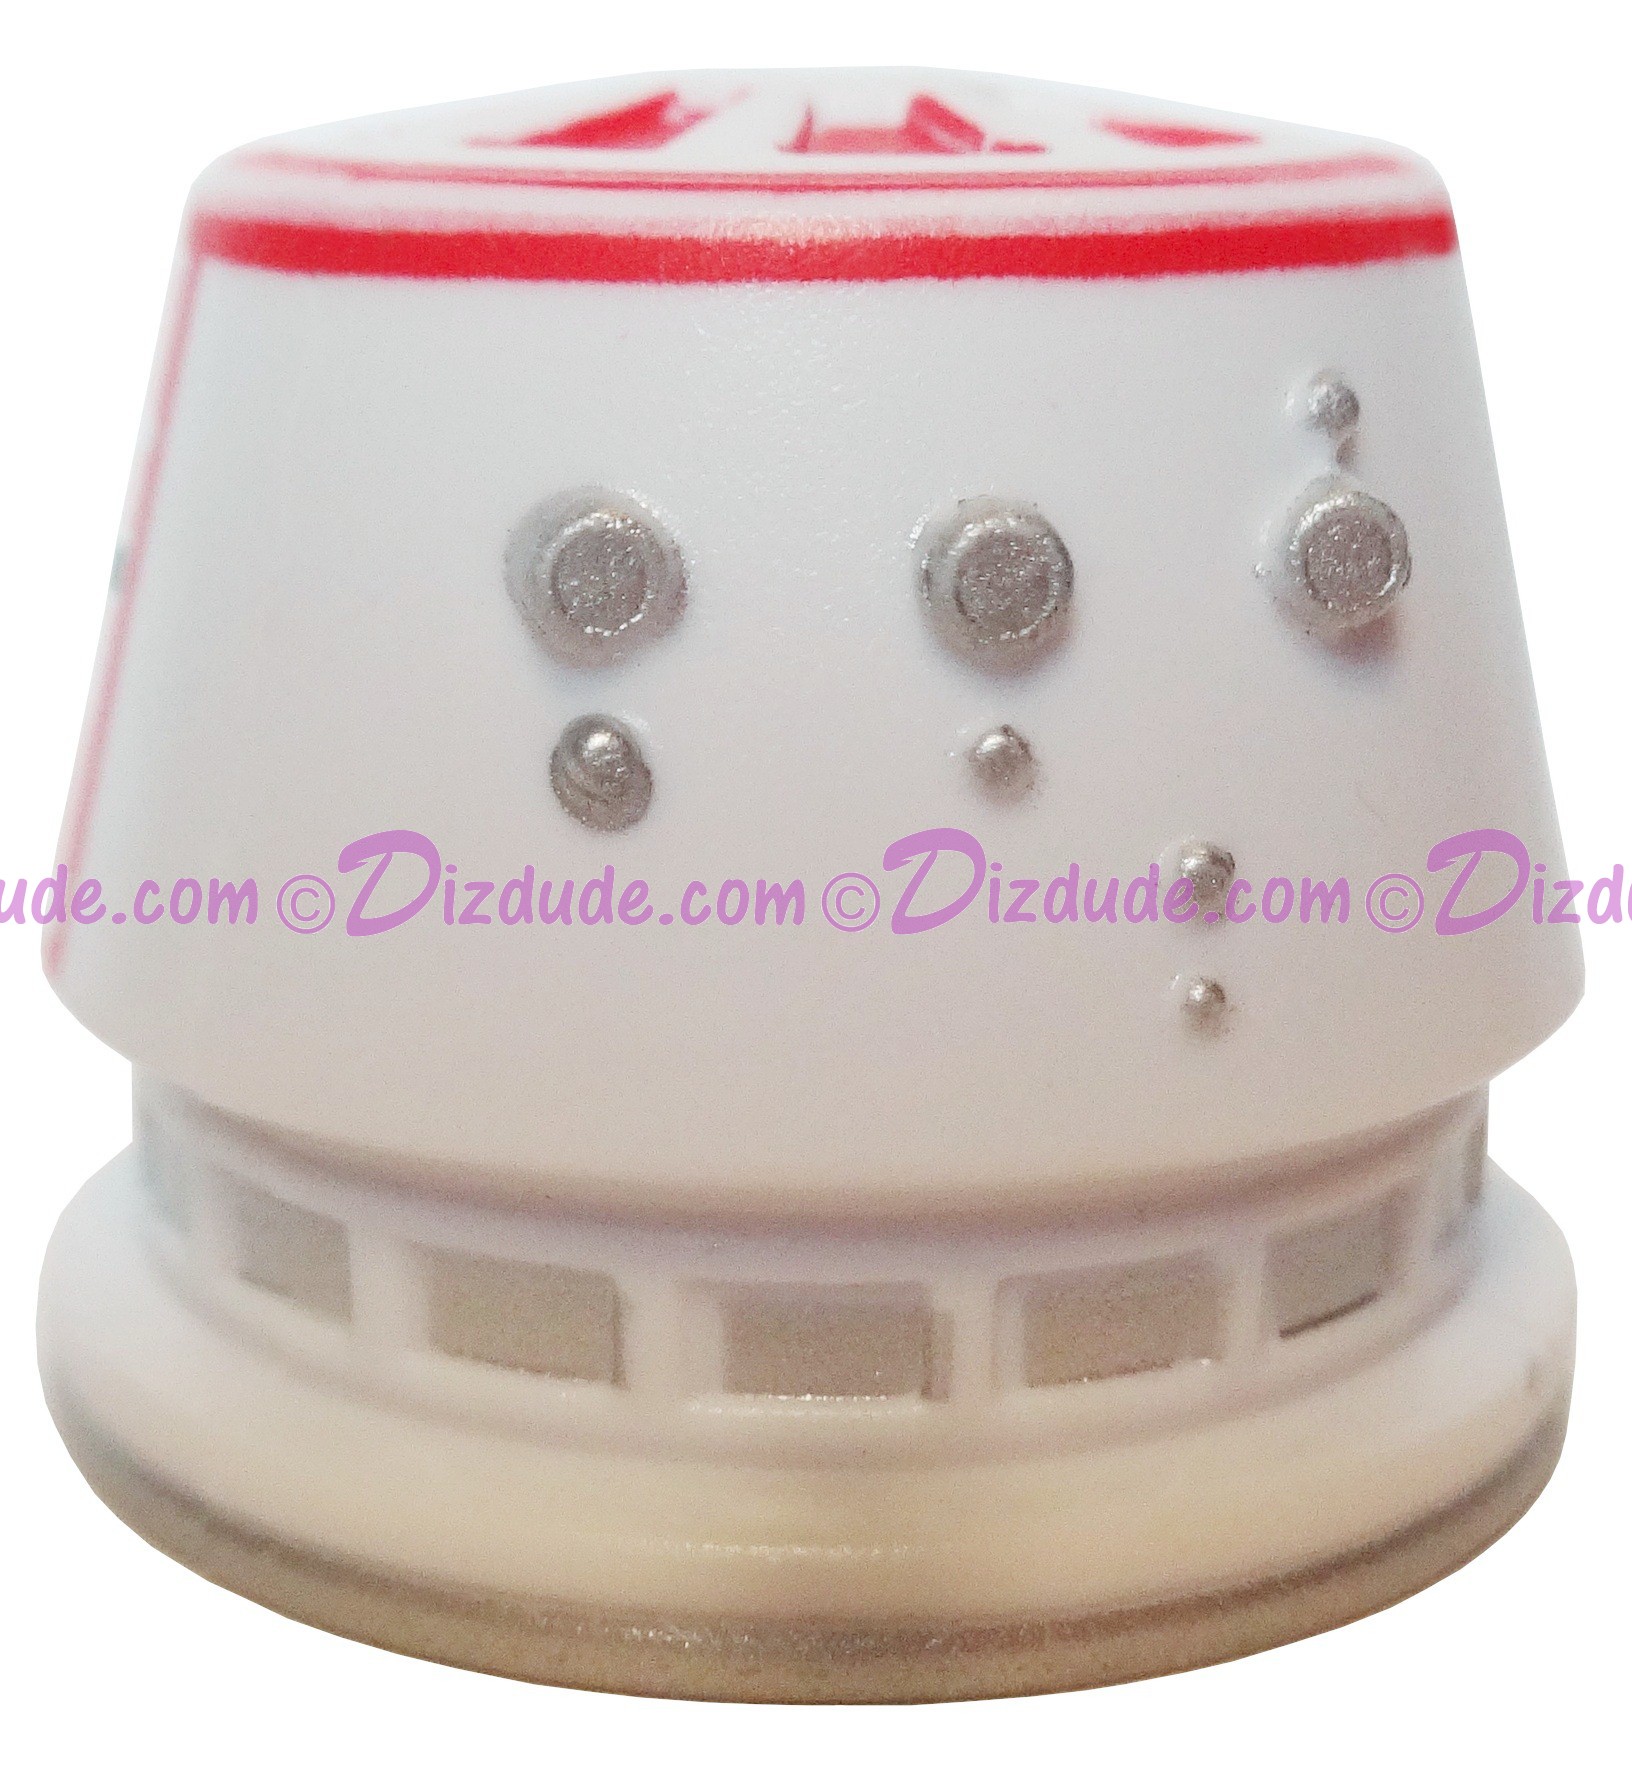 R5 White & Red Astromech Droid Dome ~ Series 2 from Disney Star Wars Build-A-Droid Factory © Dizdude.com